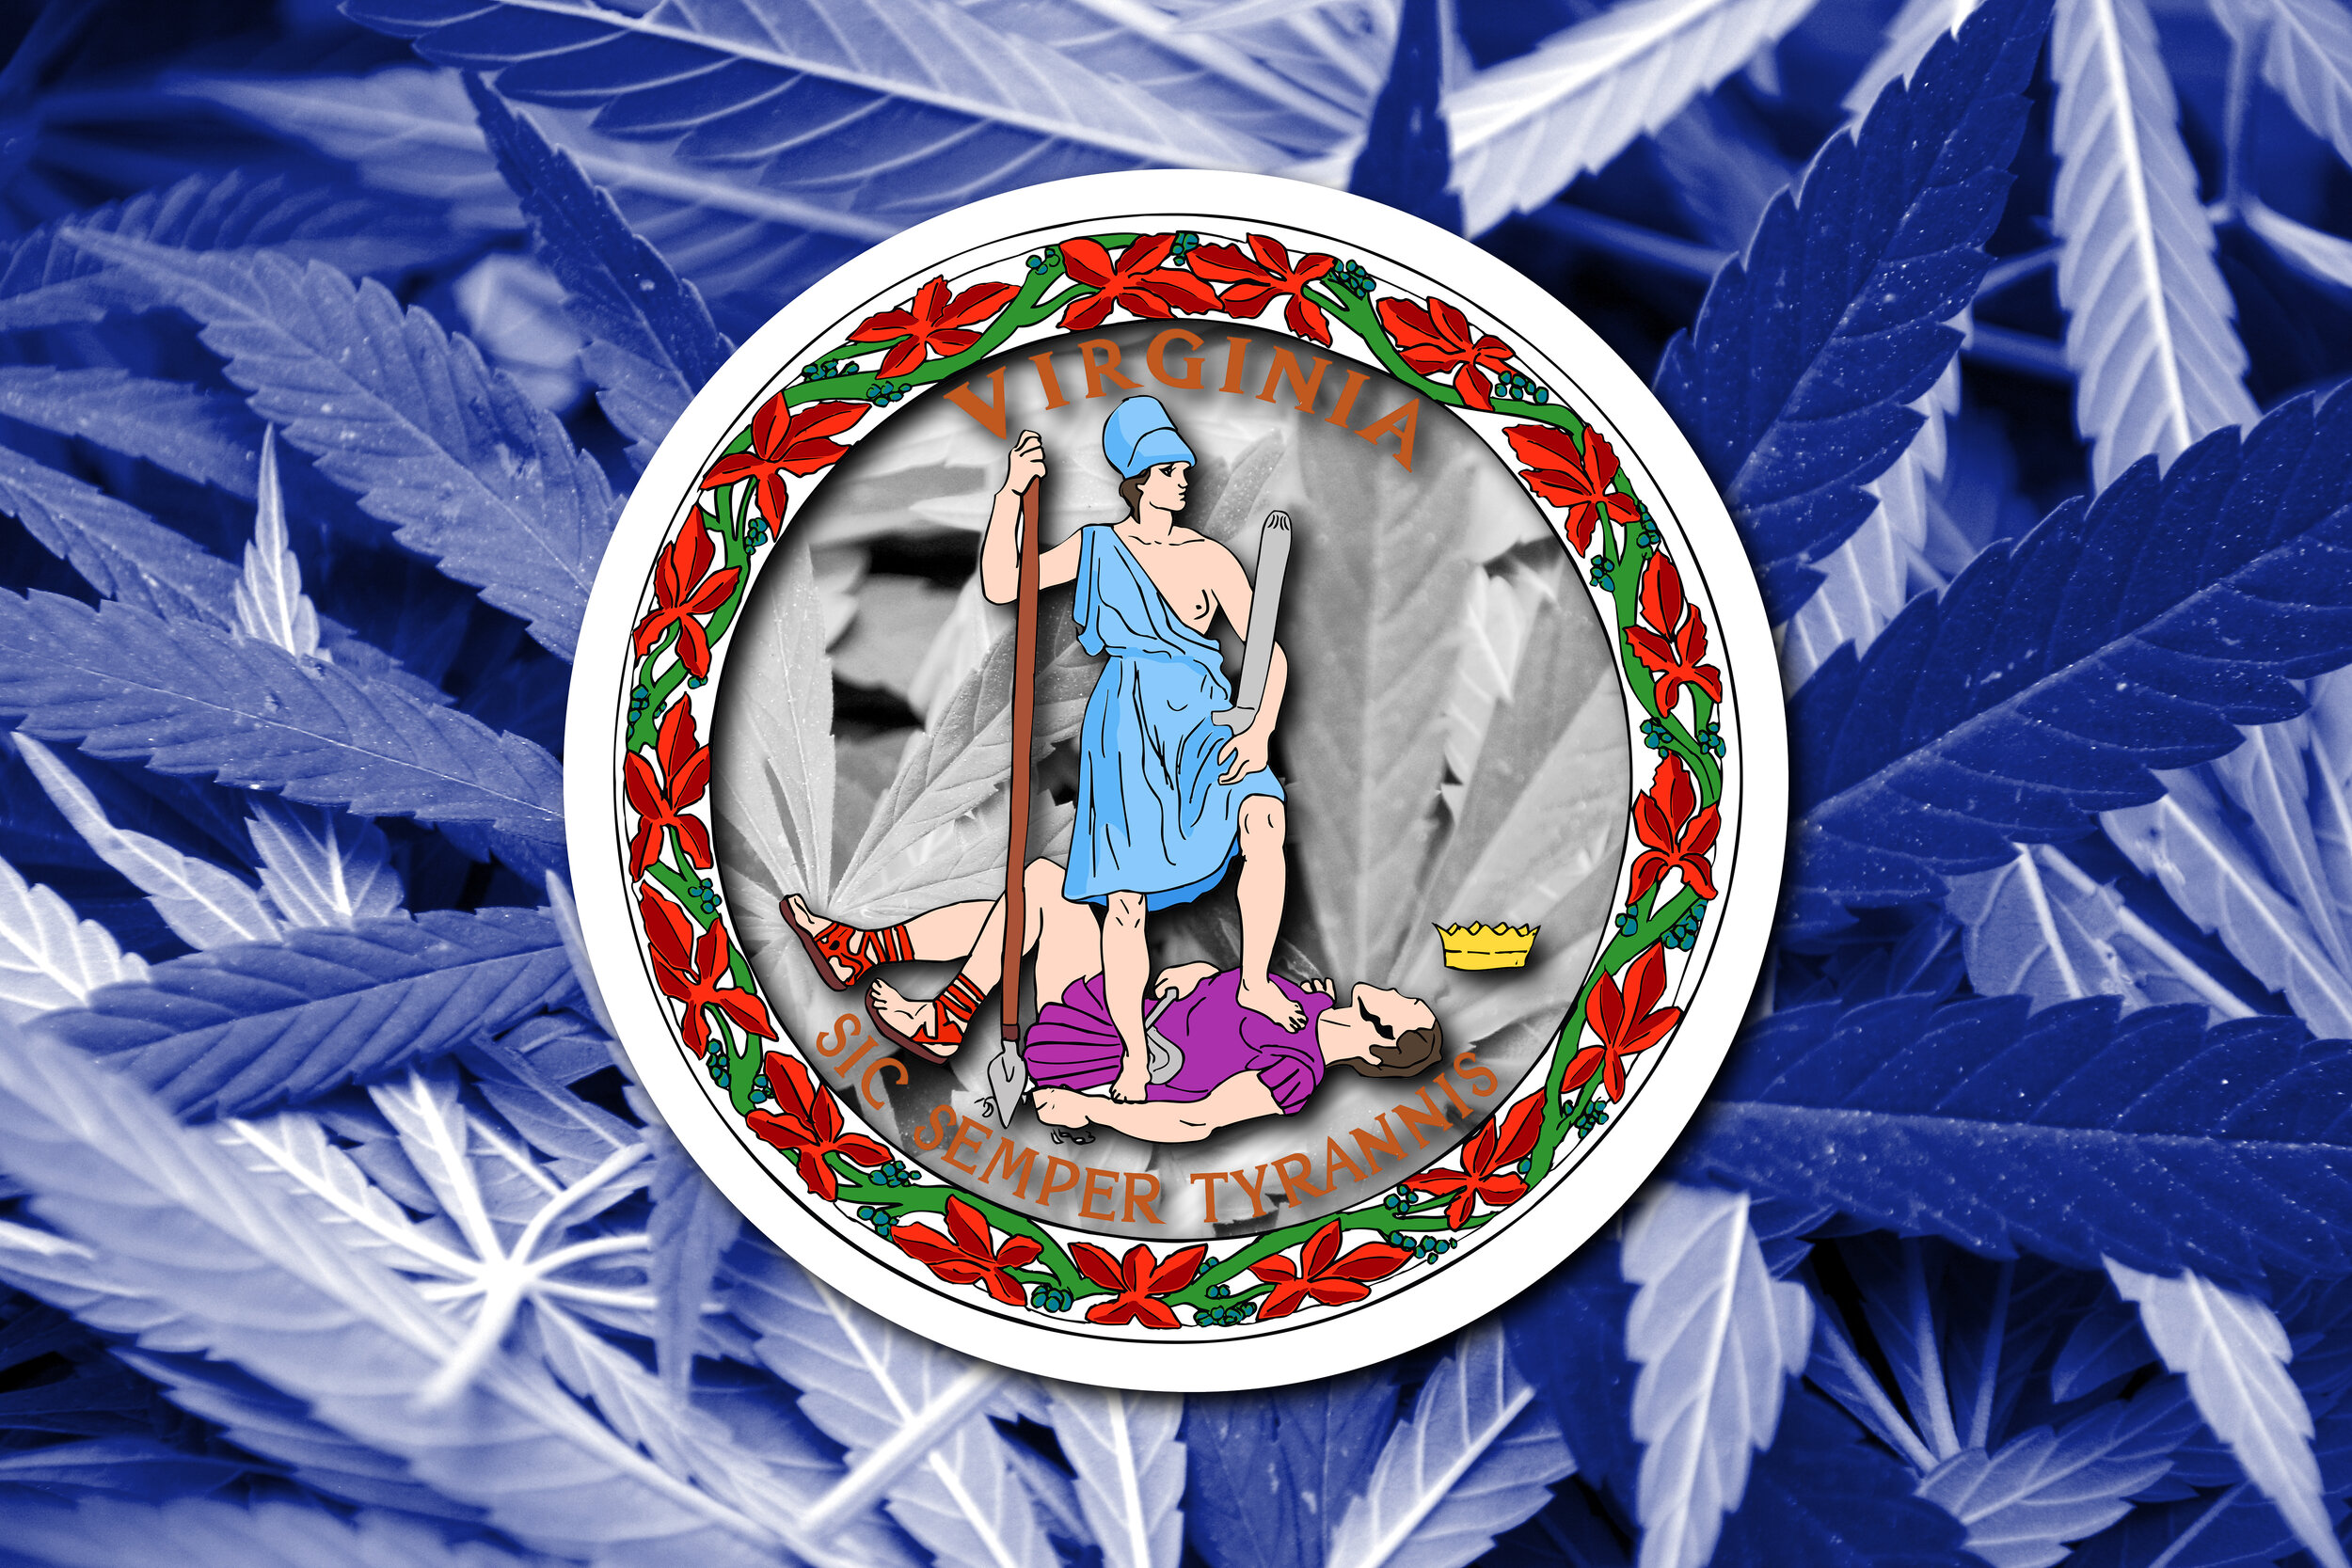 Cannabis Decriminalization in Virginia Likely Due to Several Bills